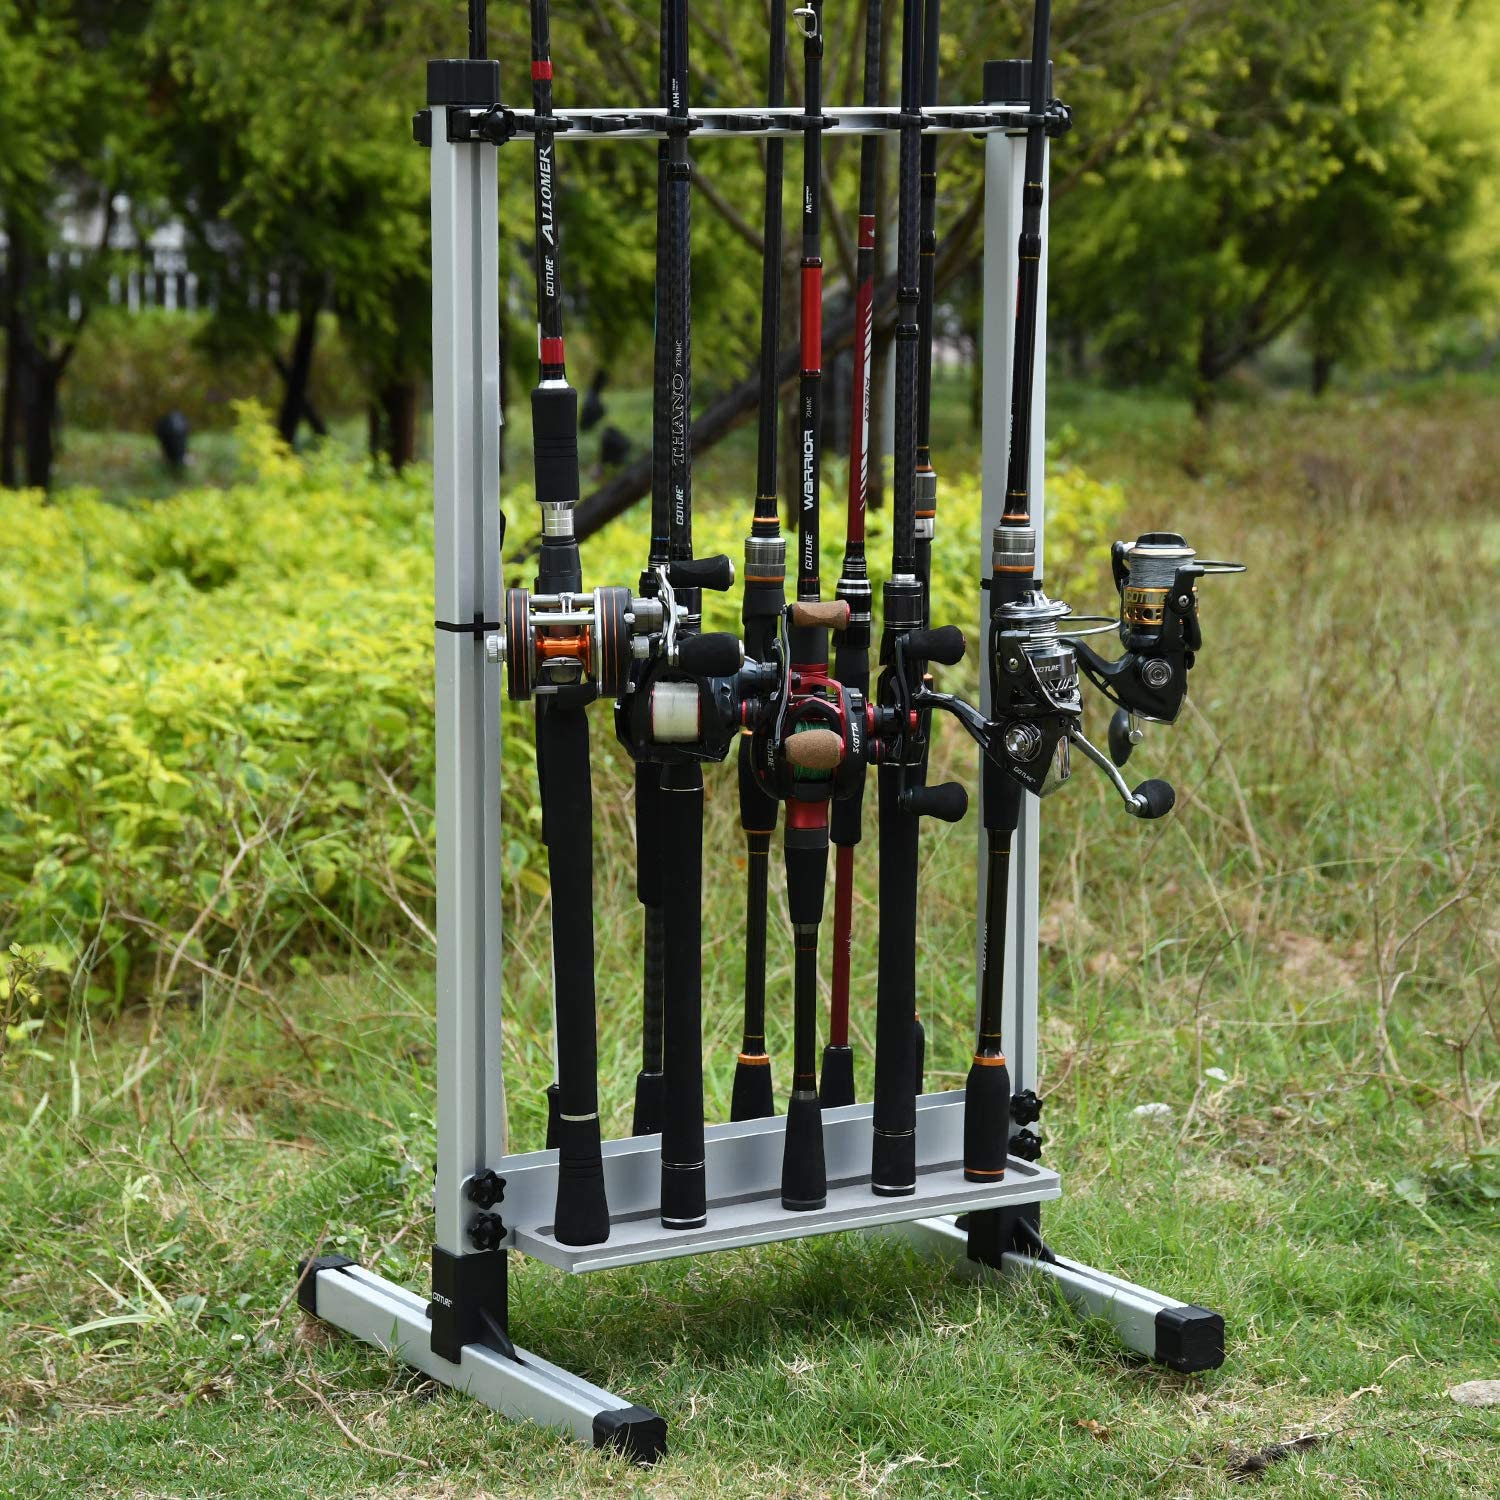 Portable Ultralight Aluminum Alloy Fishing Rod Rack for All Type Fishing Pole, Hold Up to 24 Rods - GOTURE